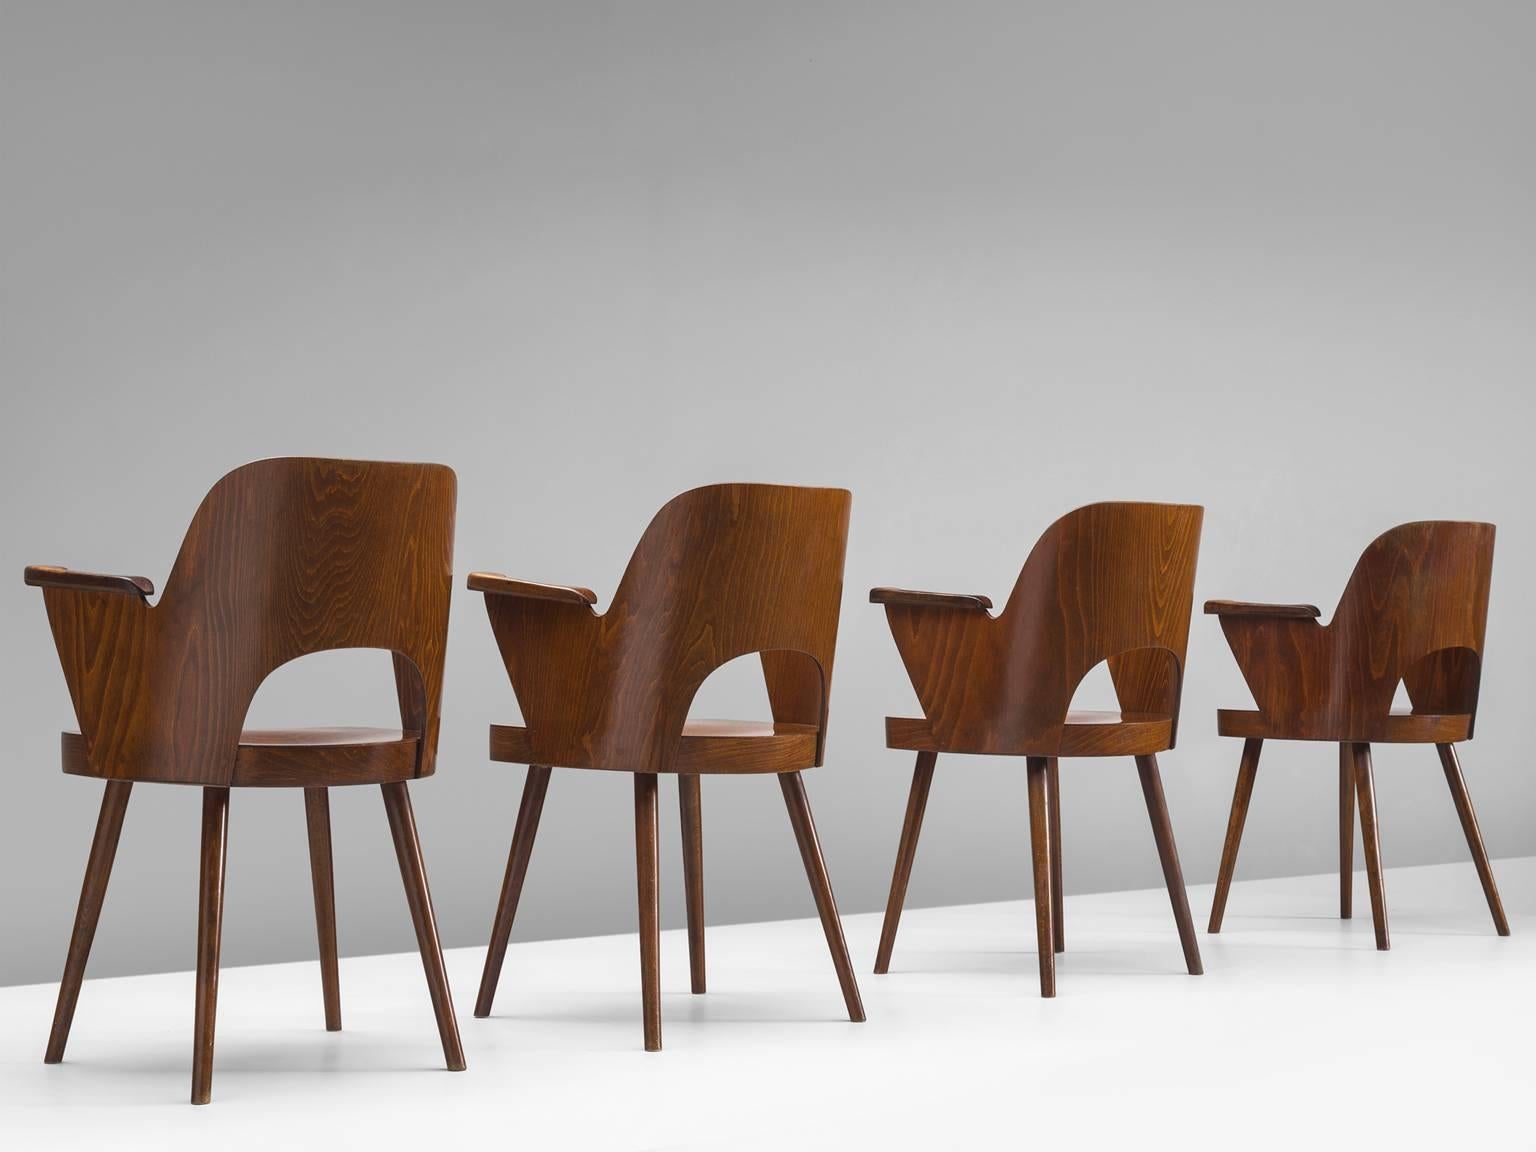 Set of four armchairs, in beech by Oswald Haerdtl for Thonet, Czech Republic, 1955.

Set of four bended plywood armchairs in beech. These chairs were designed by Oswald Haerdtl for the famous bentwood manufacturer Thonet. These chairs show nice